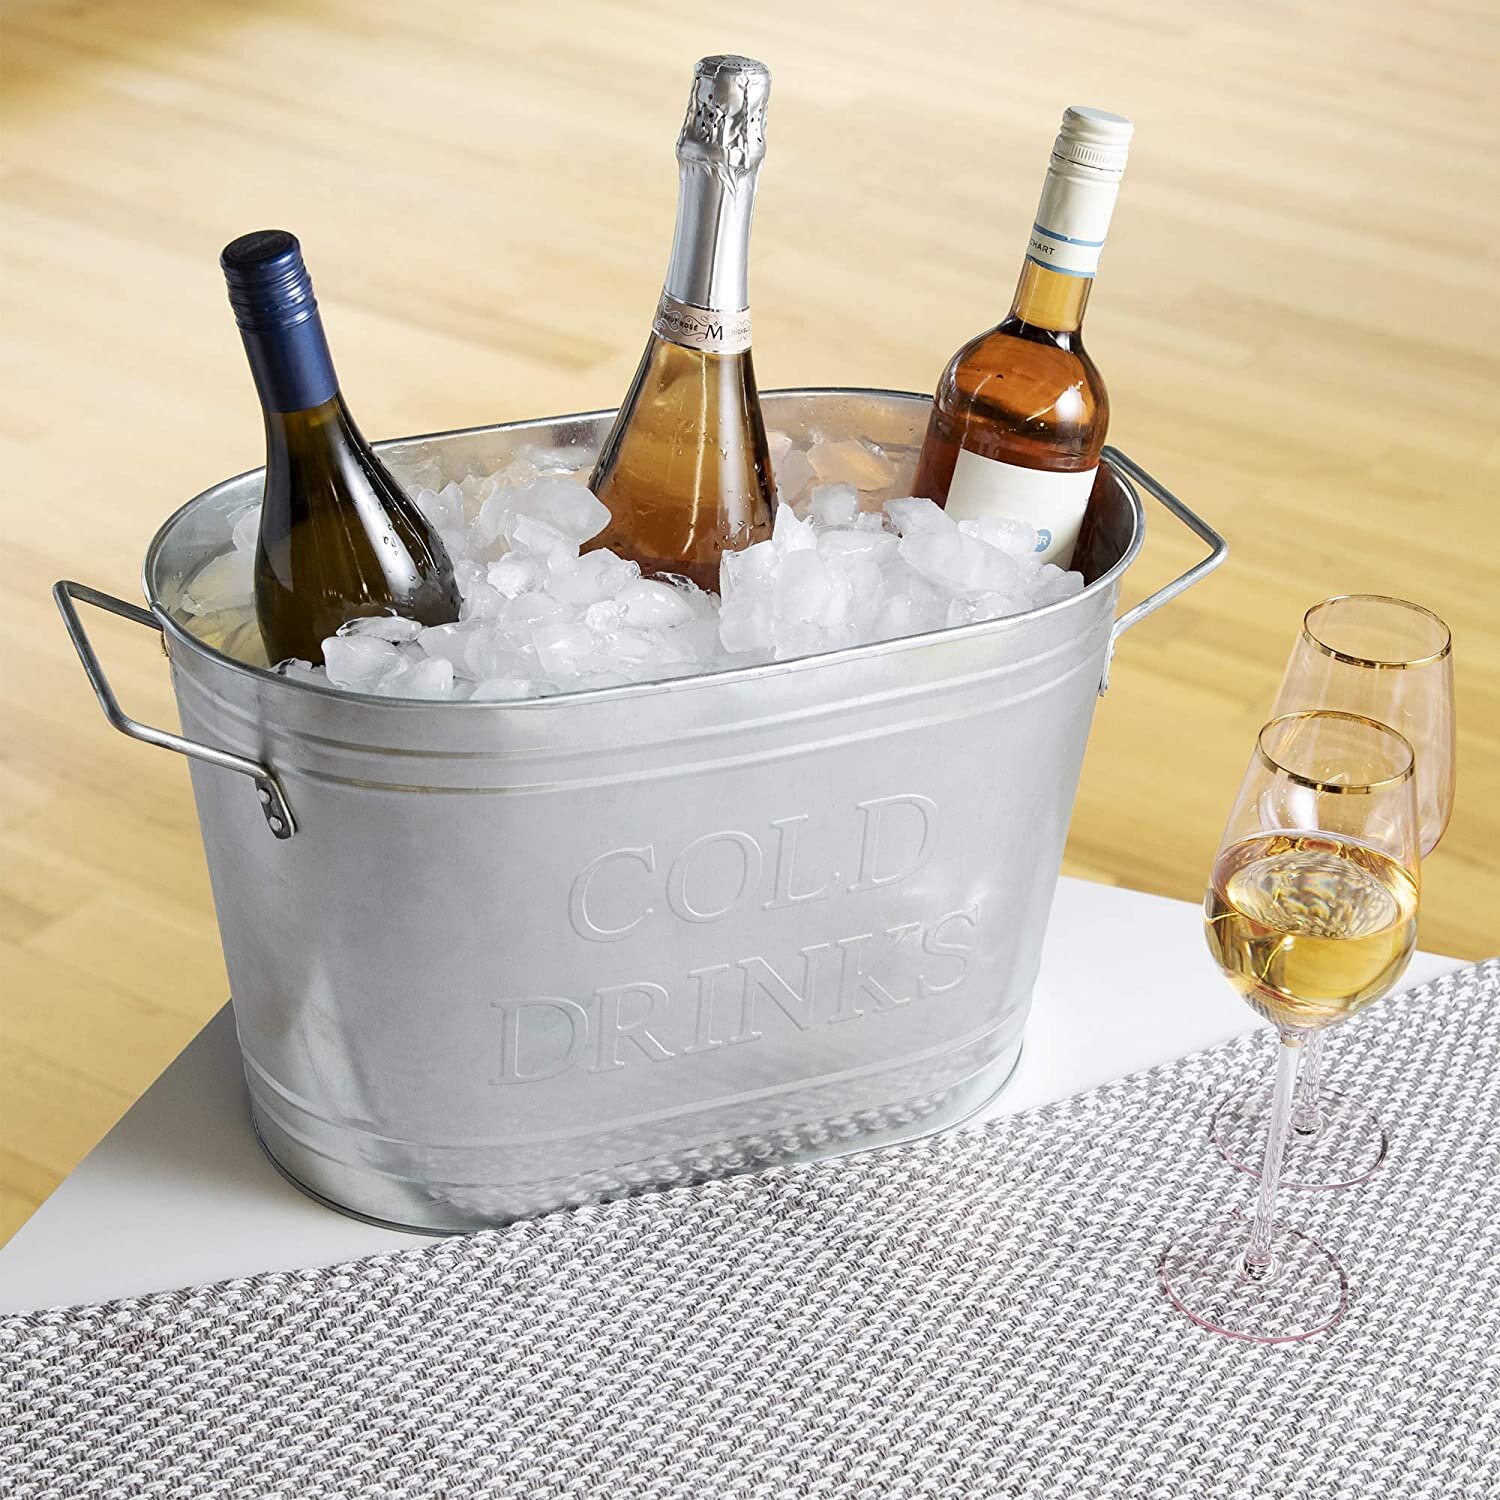 4 Litre Stainless Steel Ice Bucket Tub Wine Beer Champagne Bottle Cooler Chilled